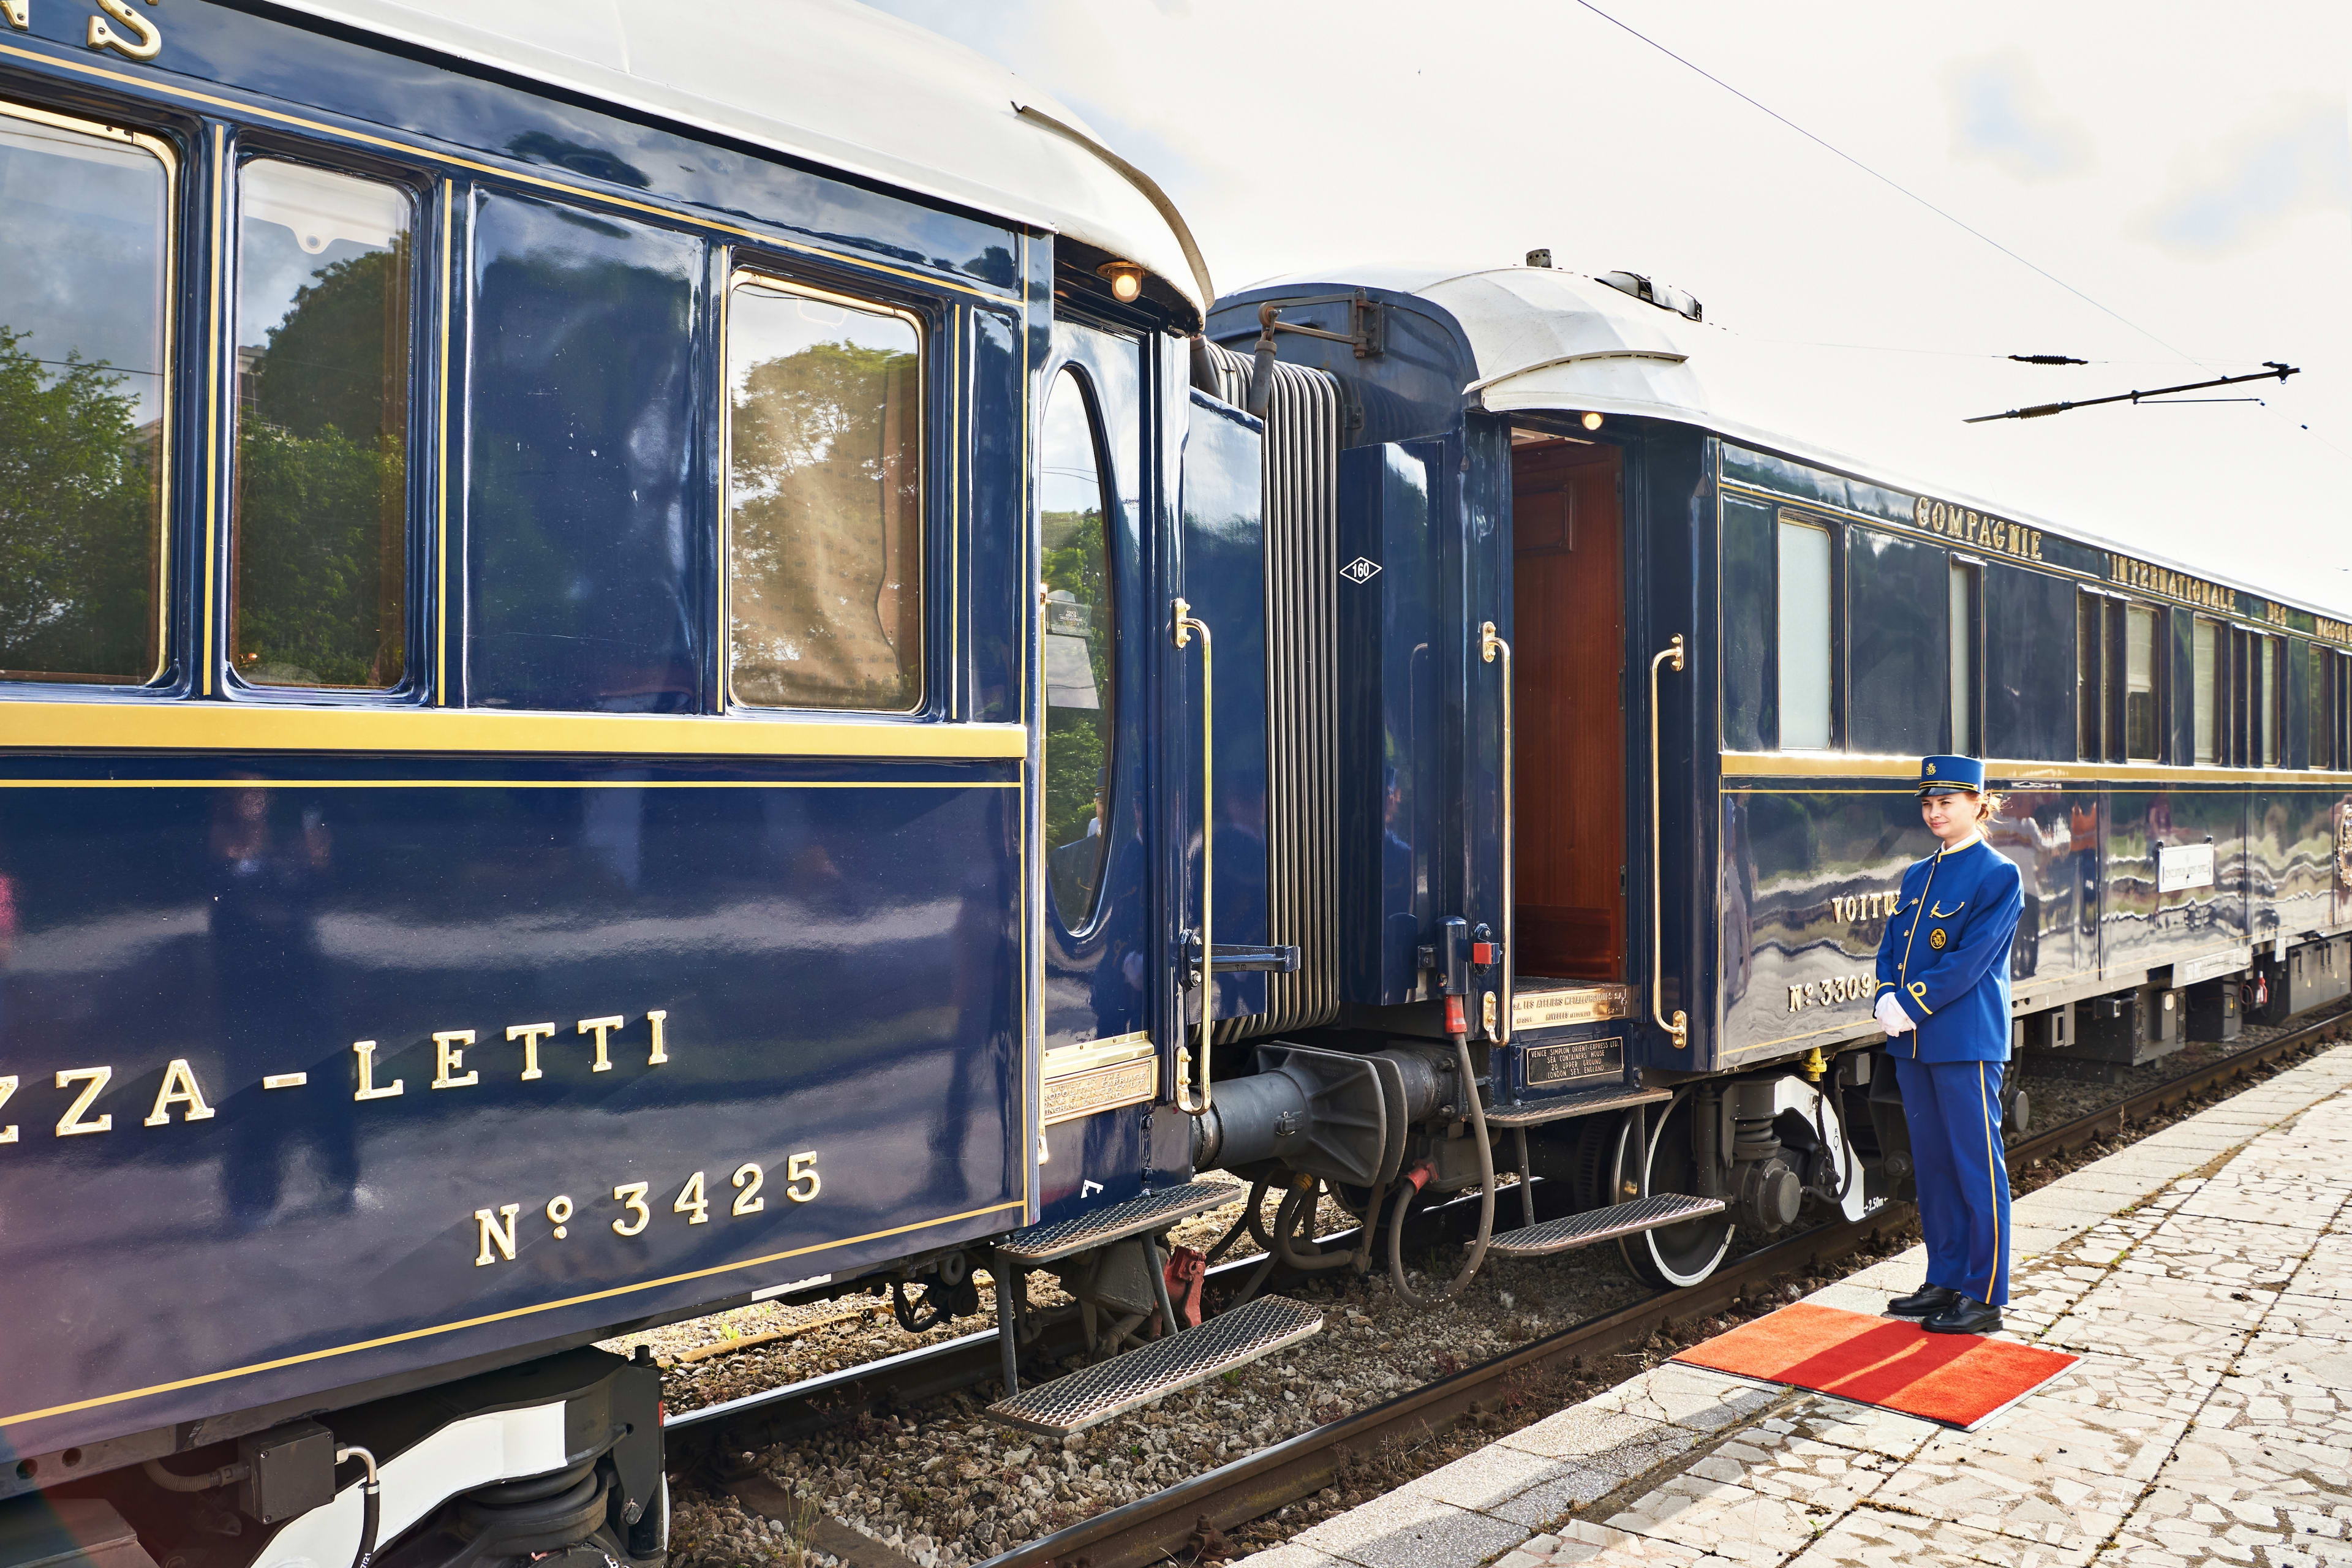 The Orient Express is one of the world’s most luxurious trains.